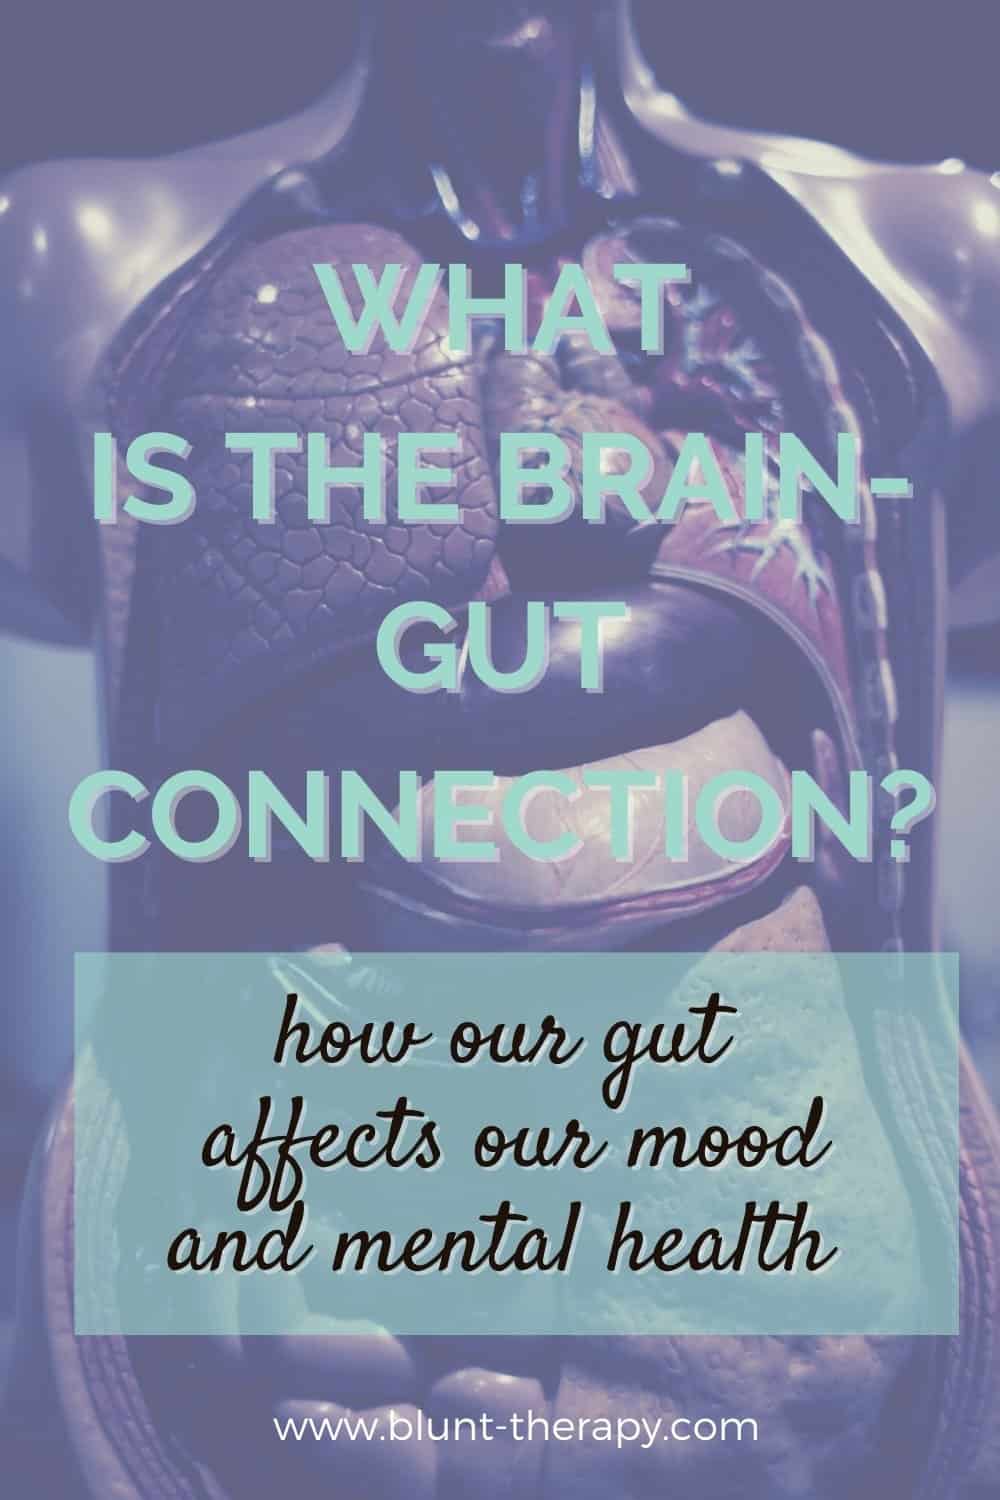 What Is The Brain-Gut Connection?